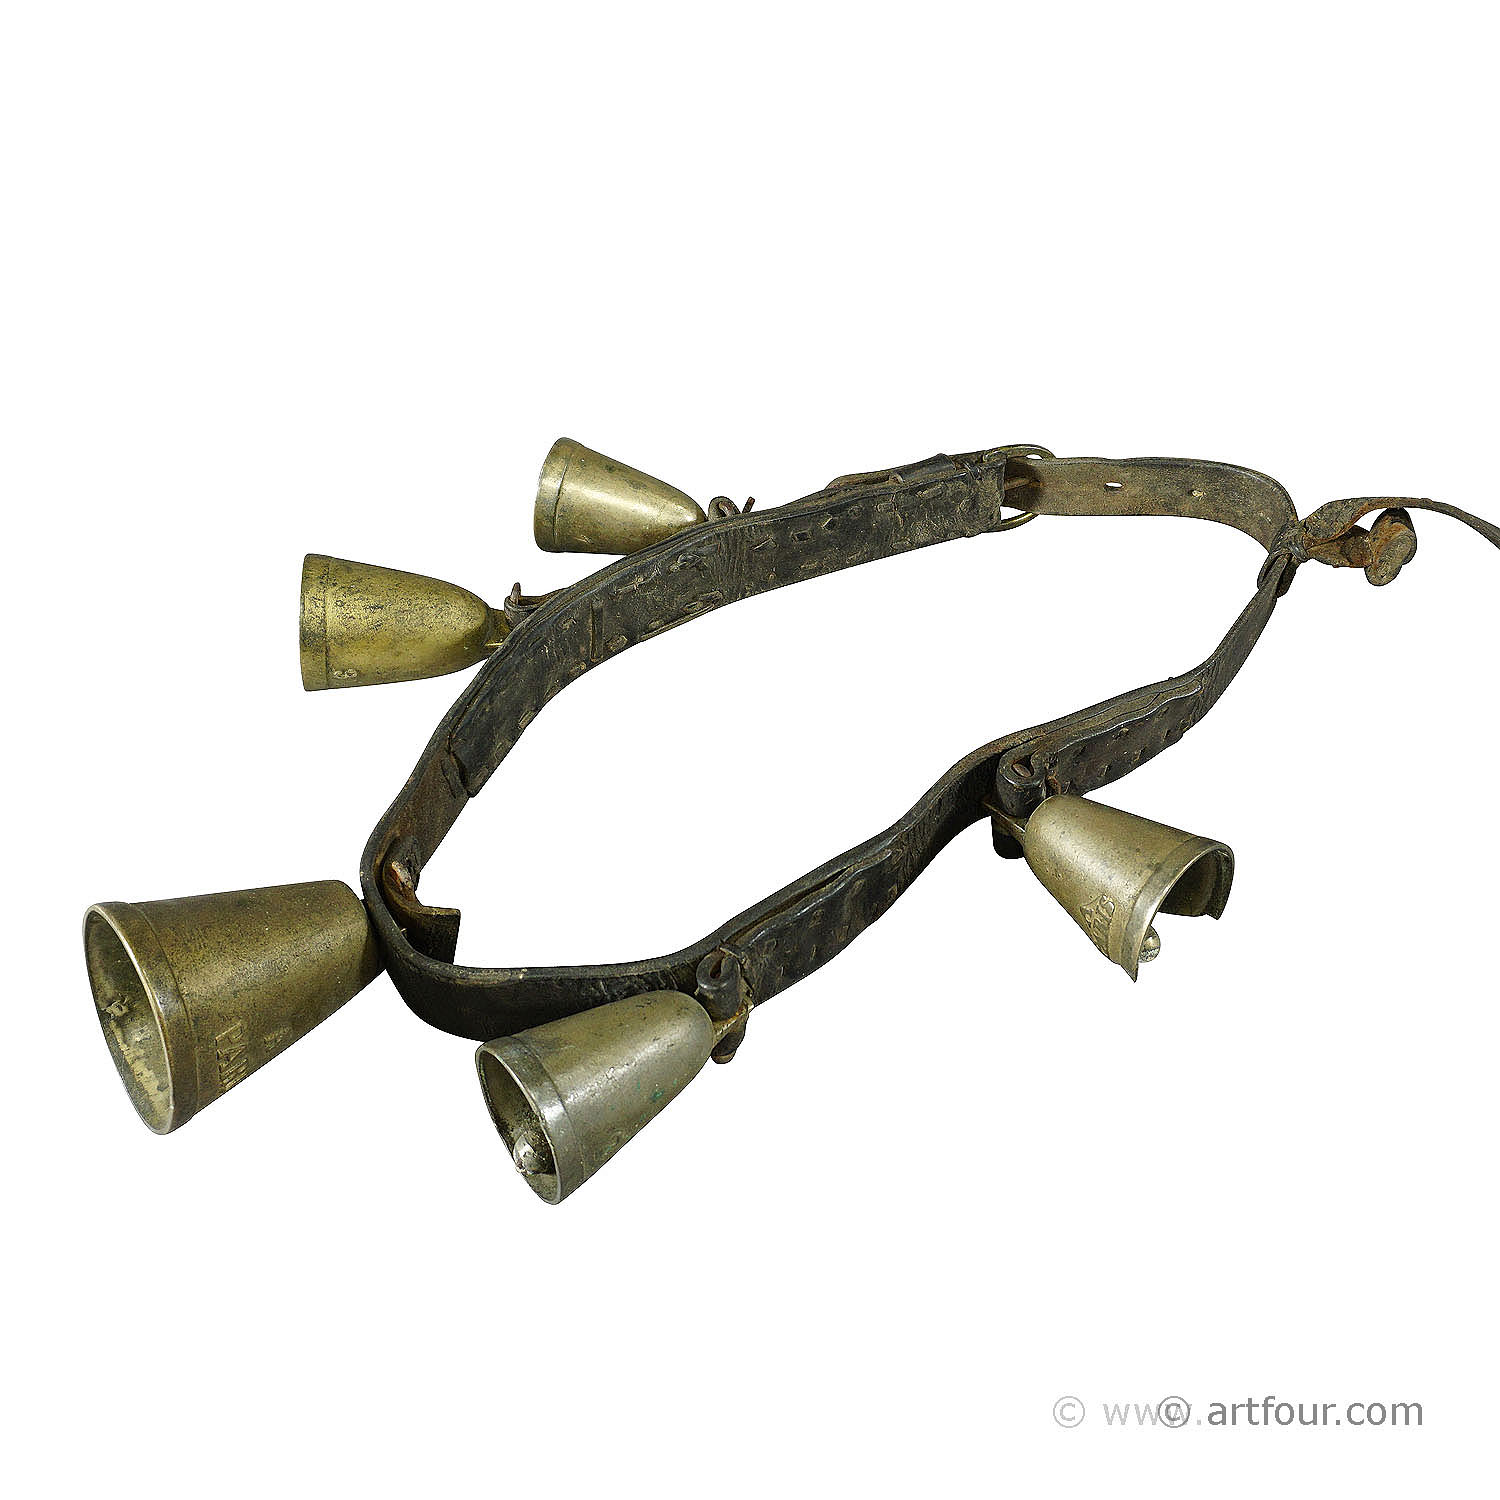 Antique Leather Strap with 5 Casted Cattle Bells, Switzerland ca. 1900s